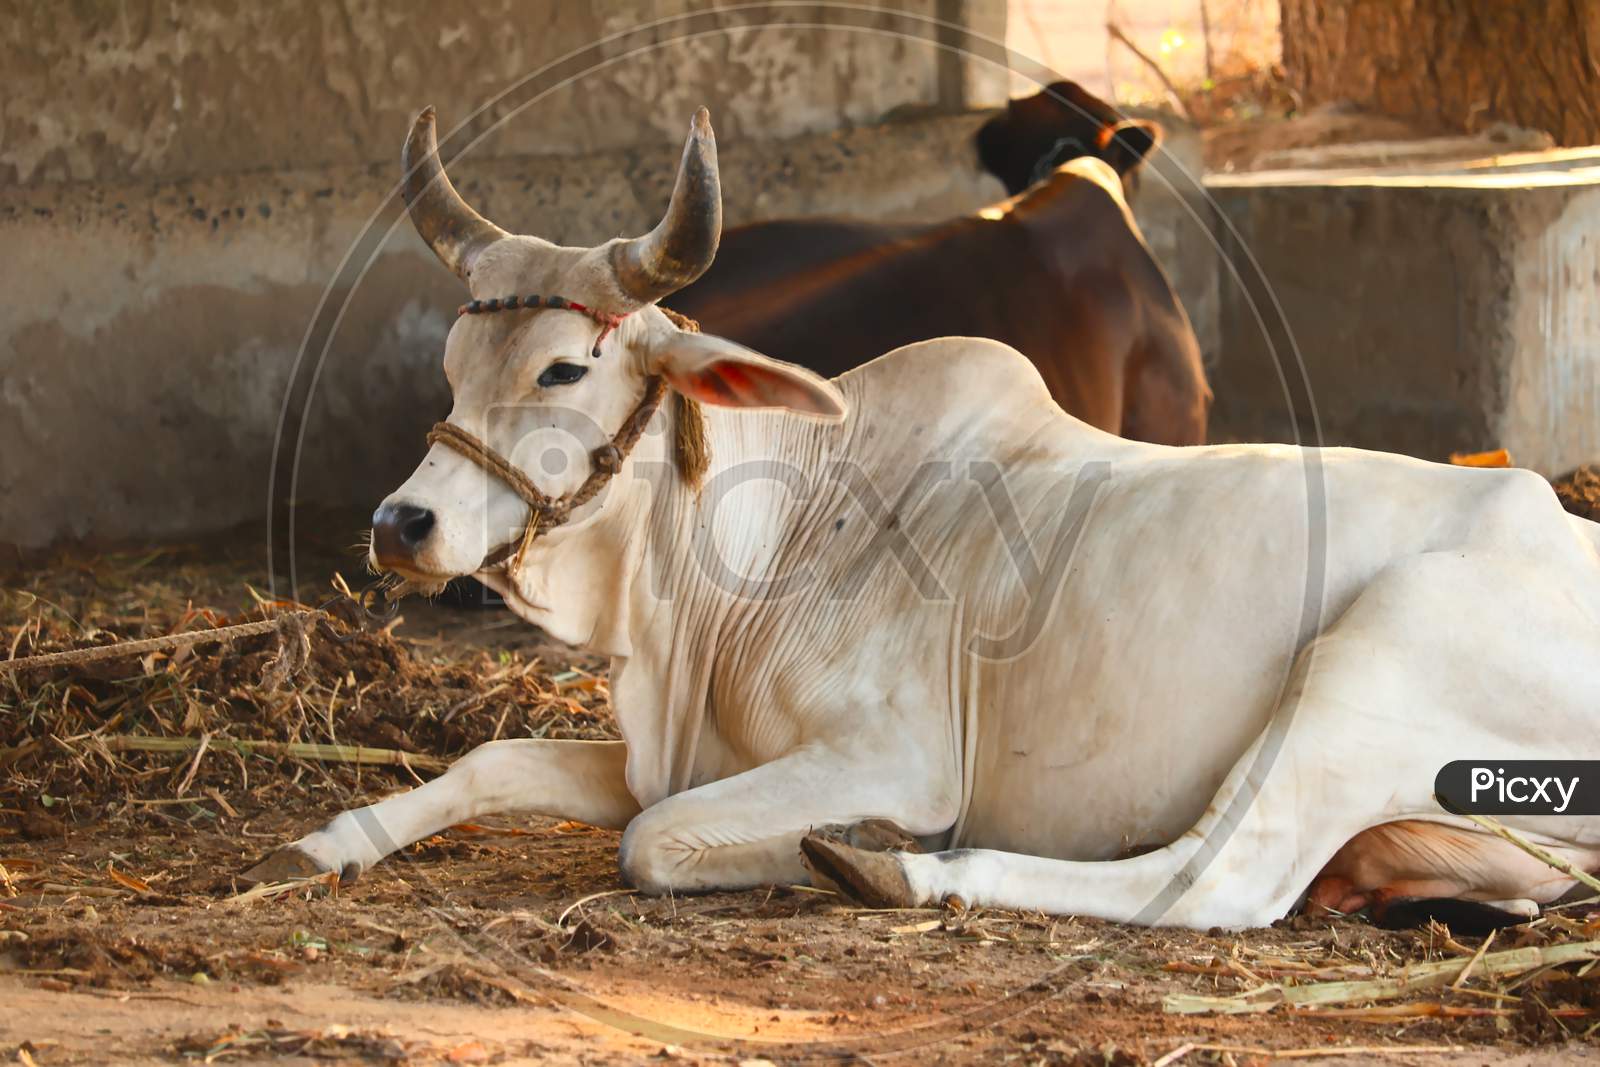 Cattle Shed Rural India, Resting Cow Calf In Farm,Dairy Products And Agriculture Industry